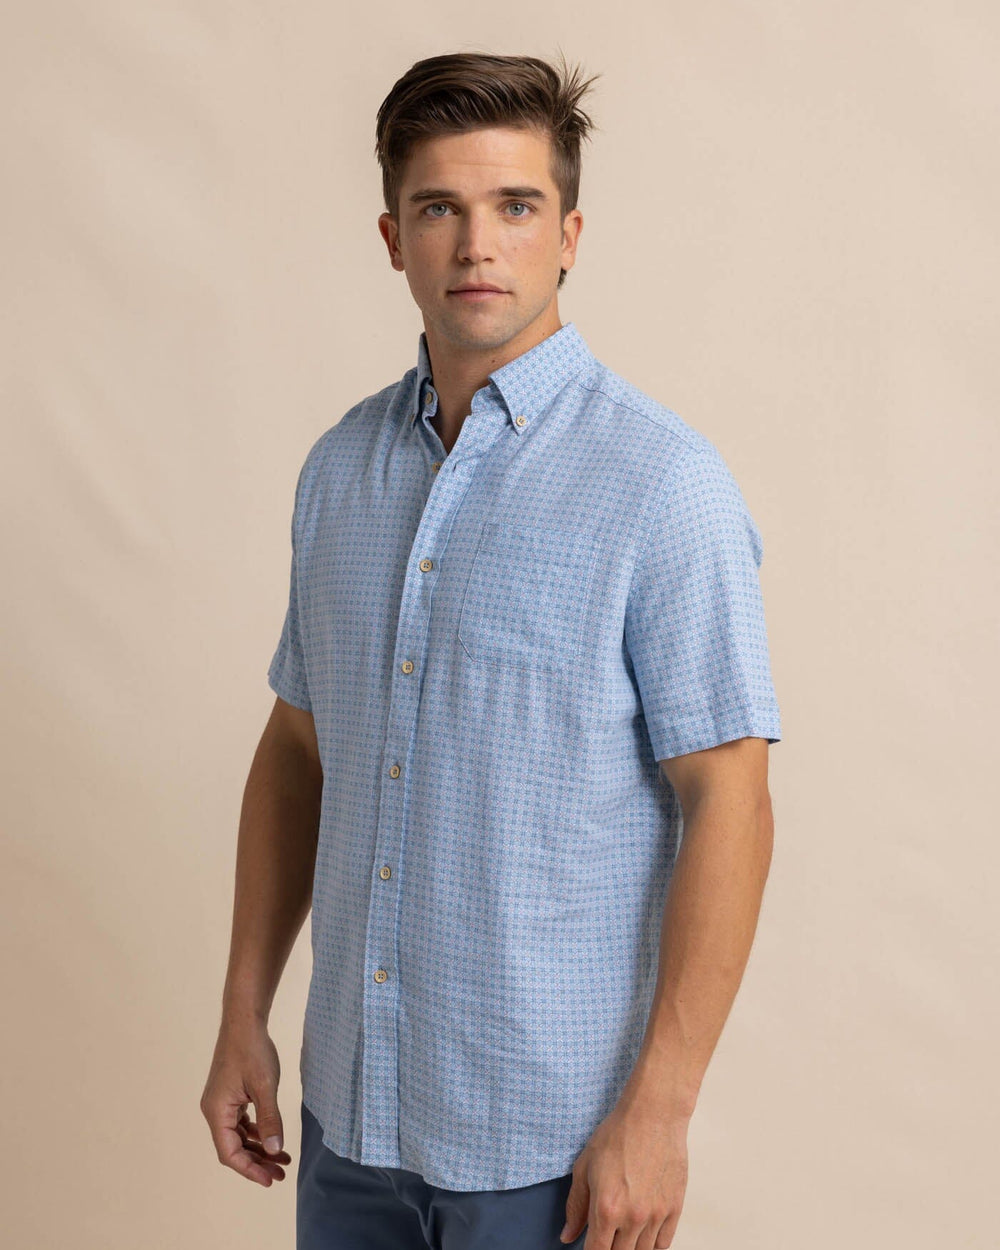 The front view of the Southern Tide Linen Rayon White Lotus Short Sleeve Sport Shirt by Southern Tide - Clearwater Blue